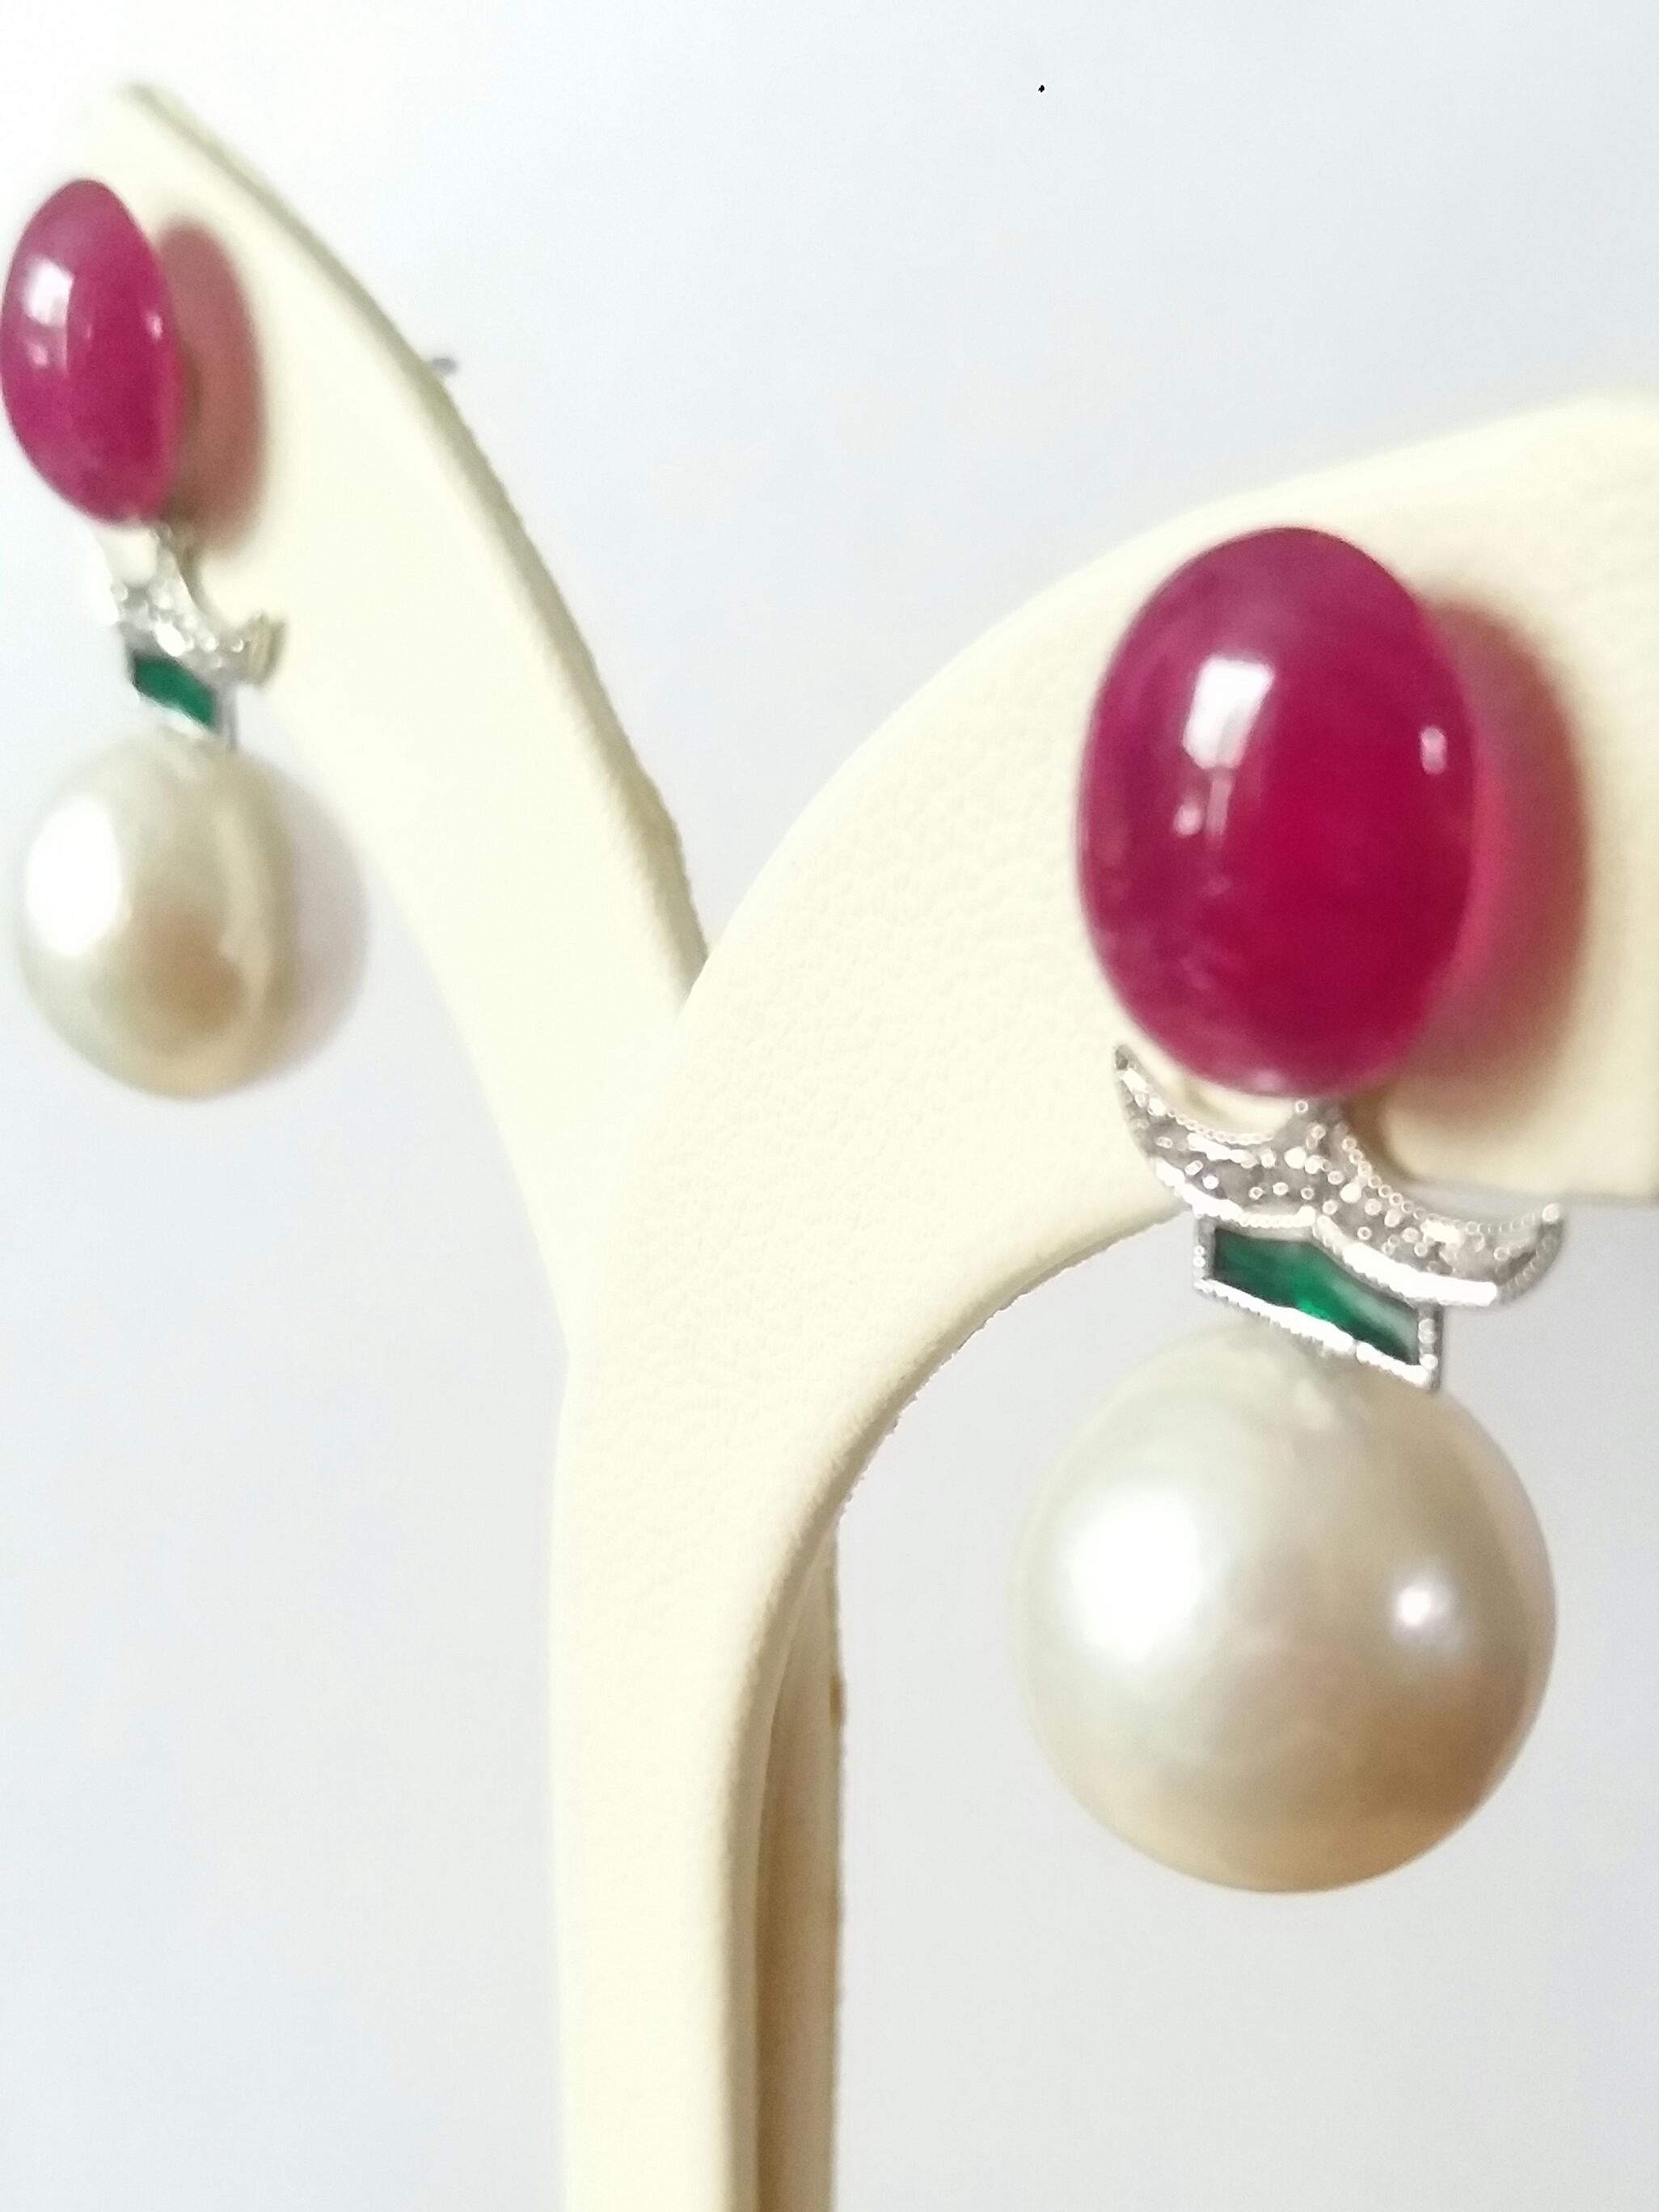 Cabochon White Baroque Pearls Ruby Cabs Green Enamel White Gold Diamonds Earrings For Sale